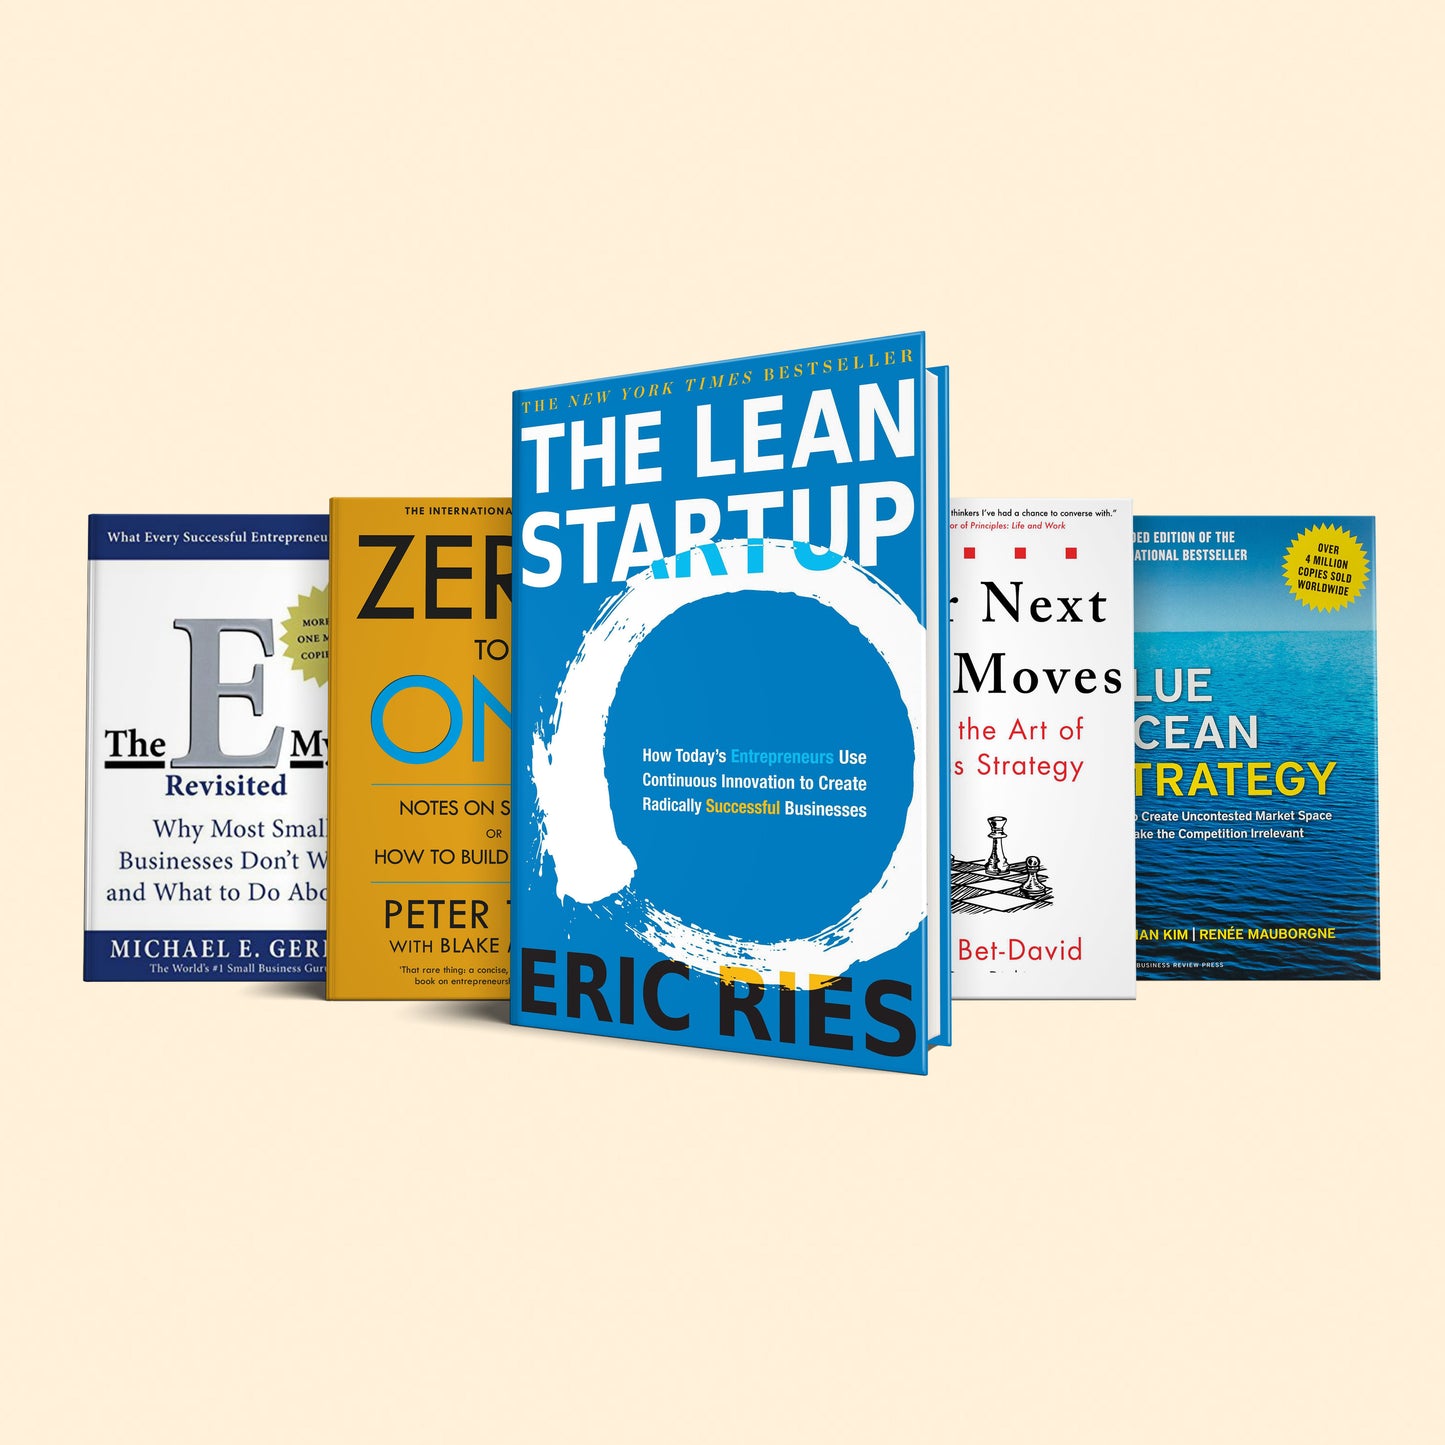 5 books to master business strategies: The lean startup, your next five moves, zero to one, Blue ocean strategy, The E-myth revisited